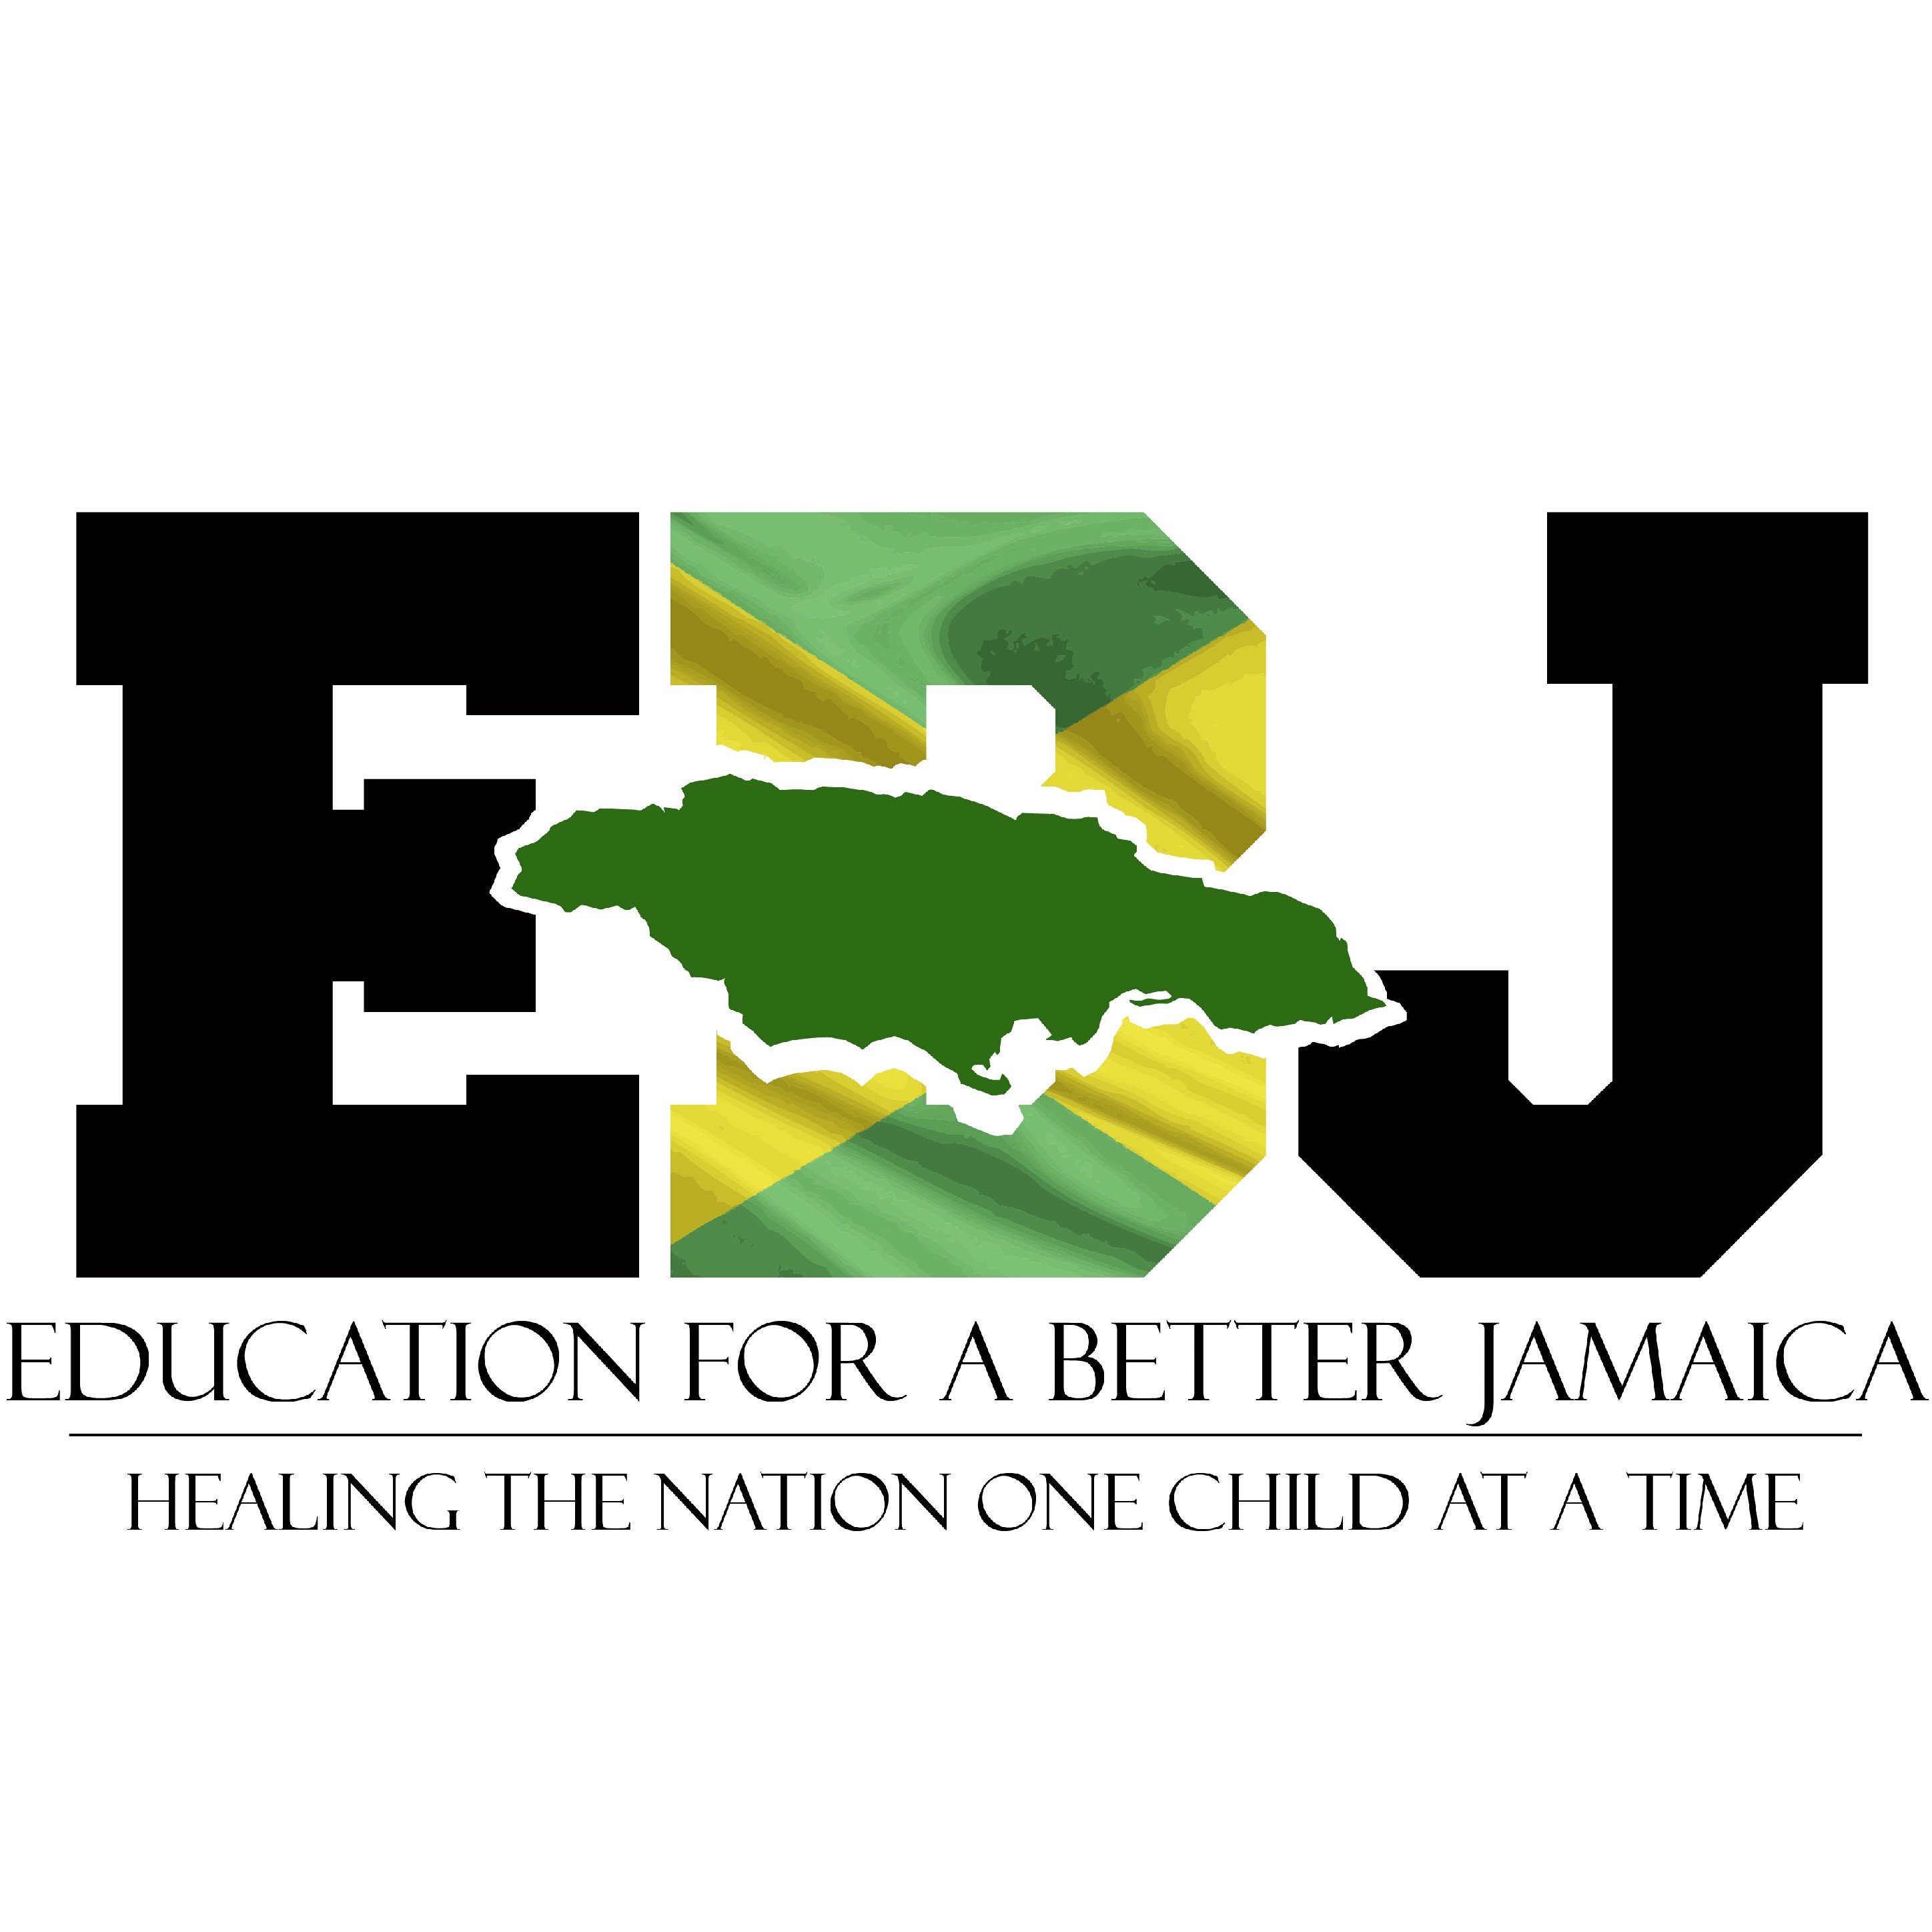 Education for a Better Jamaica (EBJ) is a non-profit determined to make a change in Jamaica through education. Education is the most powerful weapon-N.Mandela